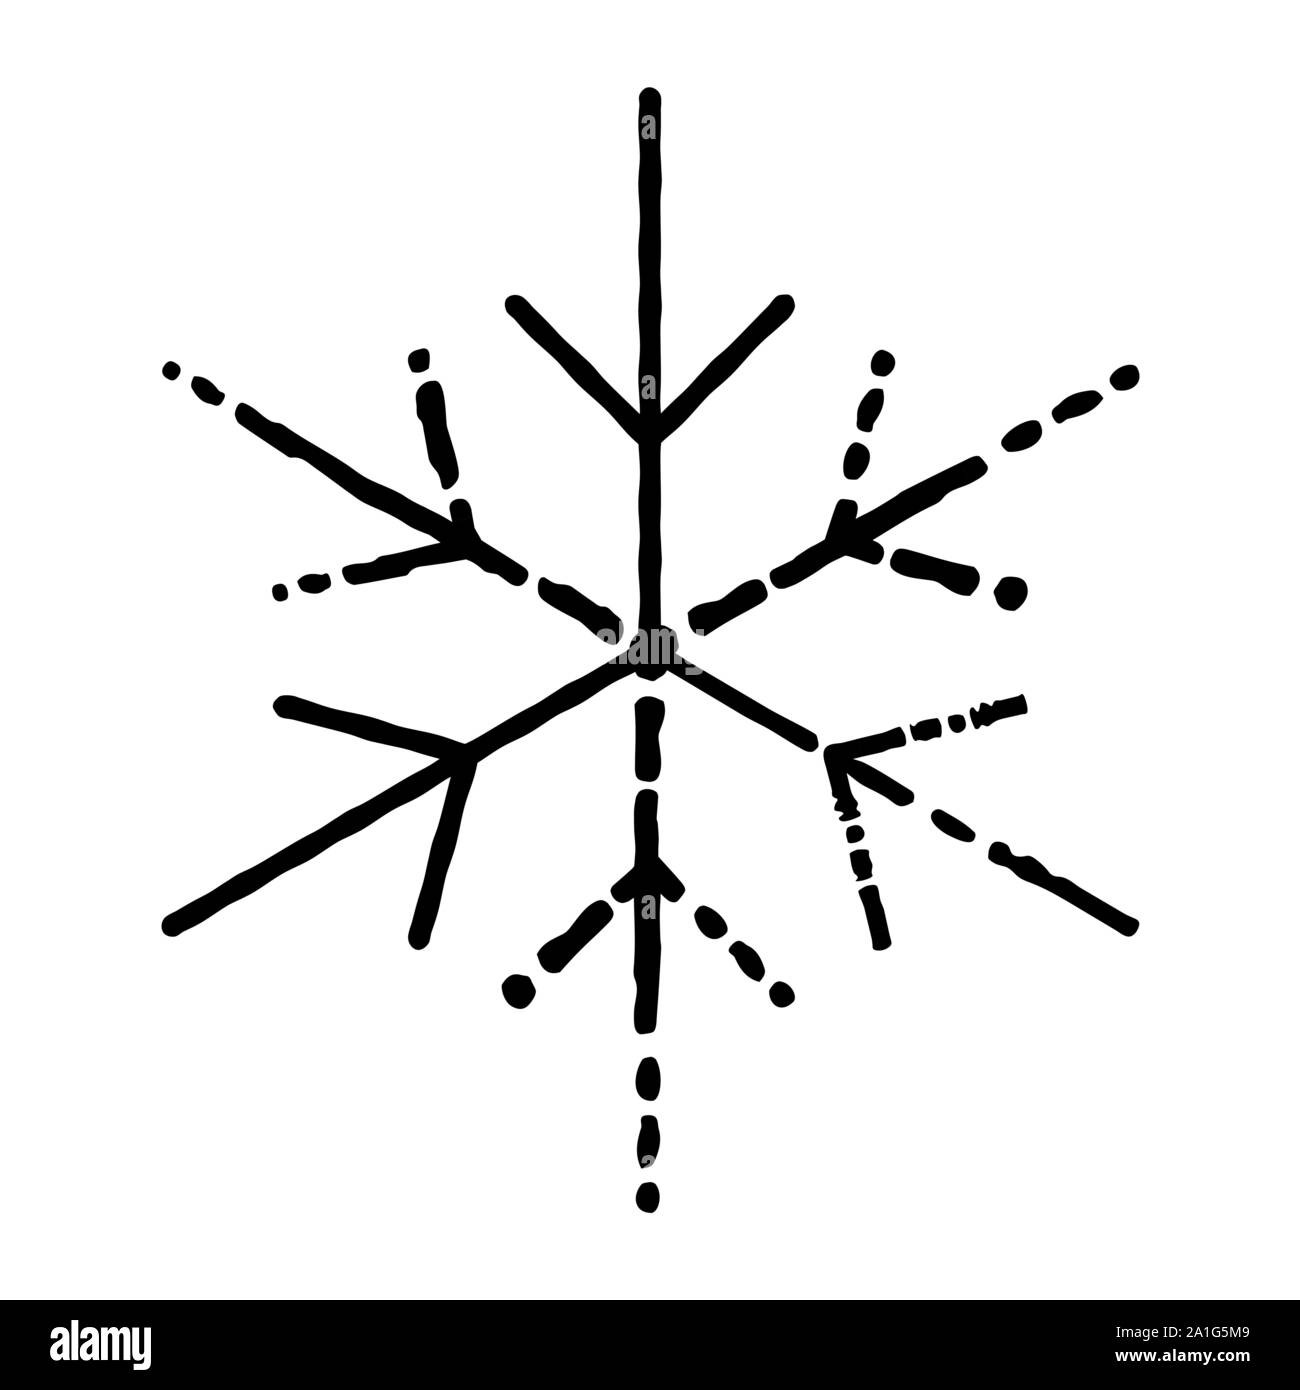 Isolated Grunge Snowflake Stock Vector